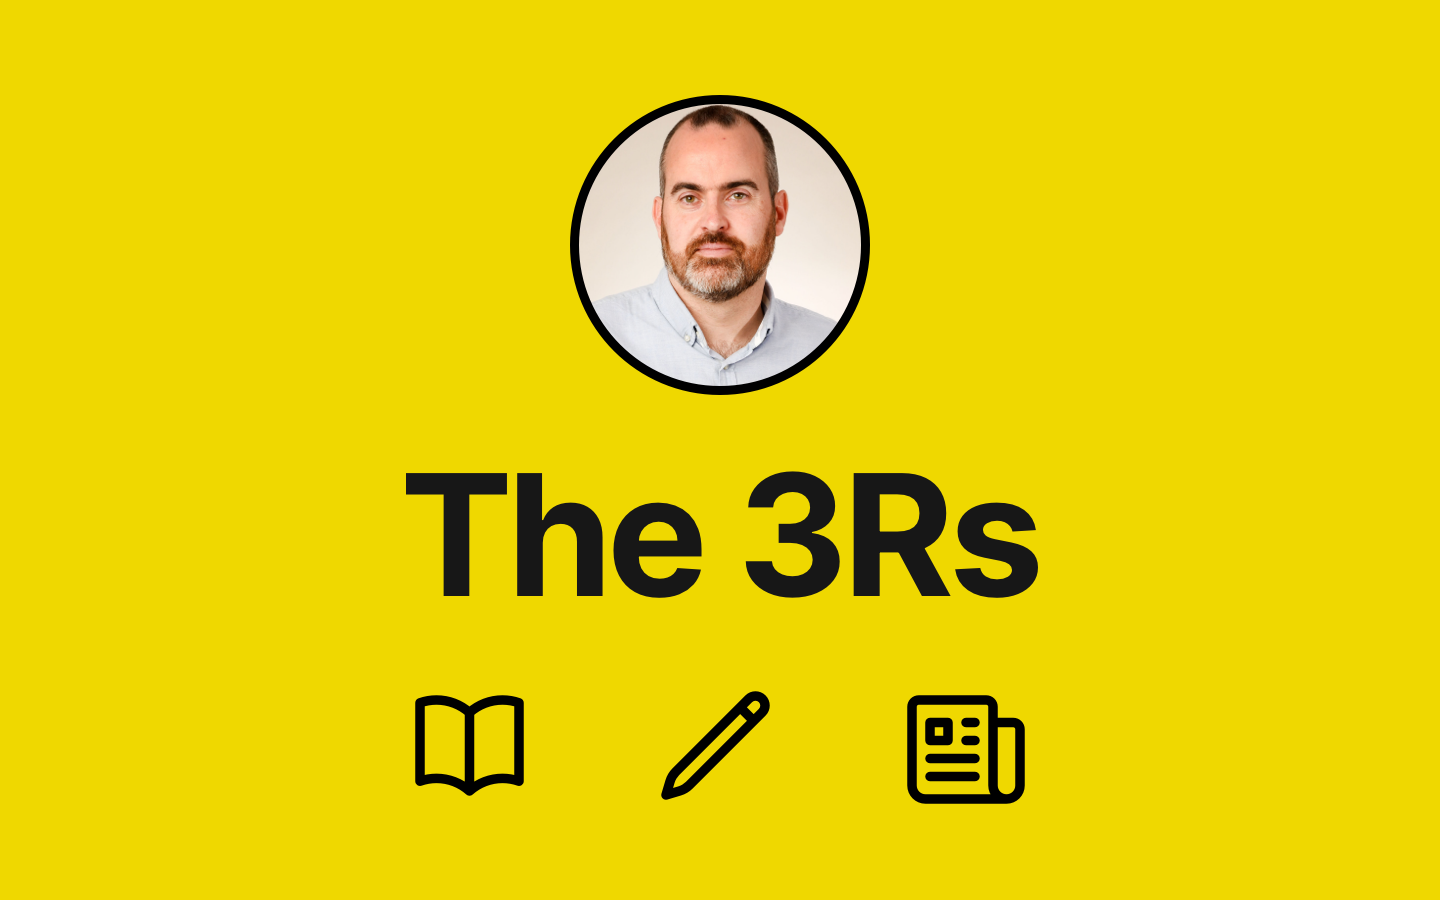 The 3Rs - Reading, w®iting, and research to be interested in #23 feature image